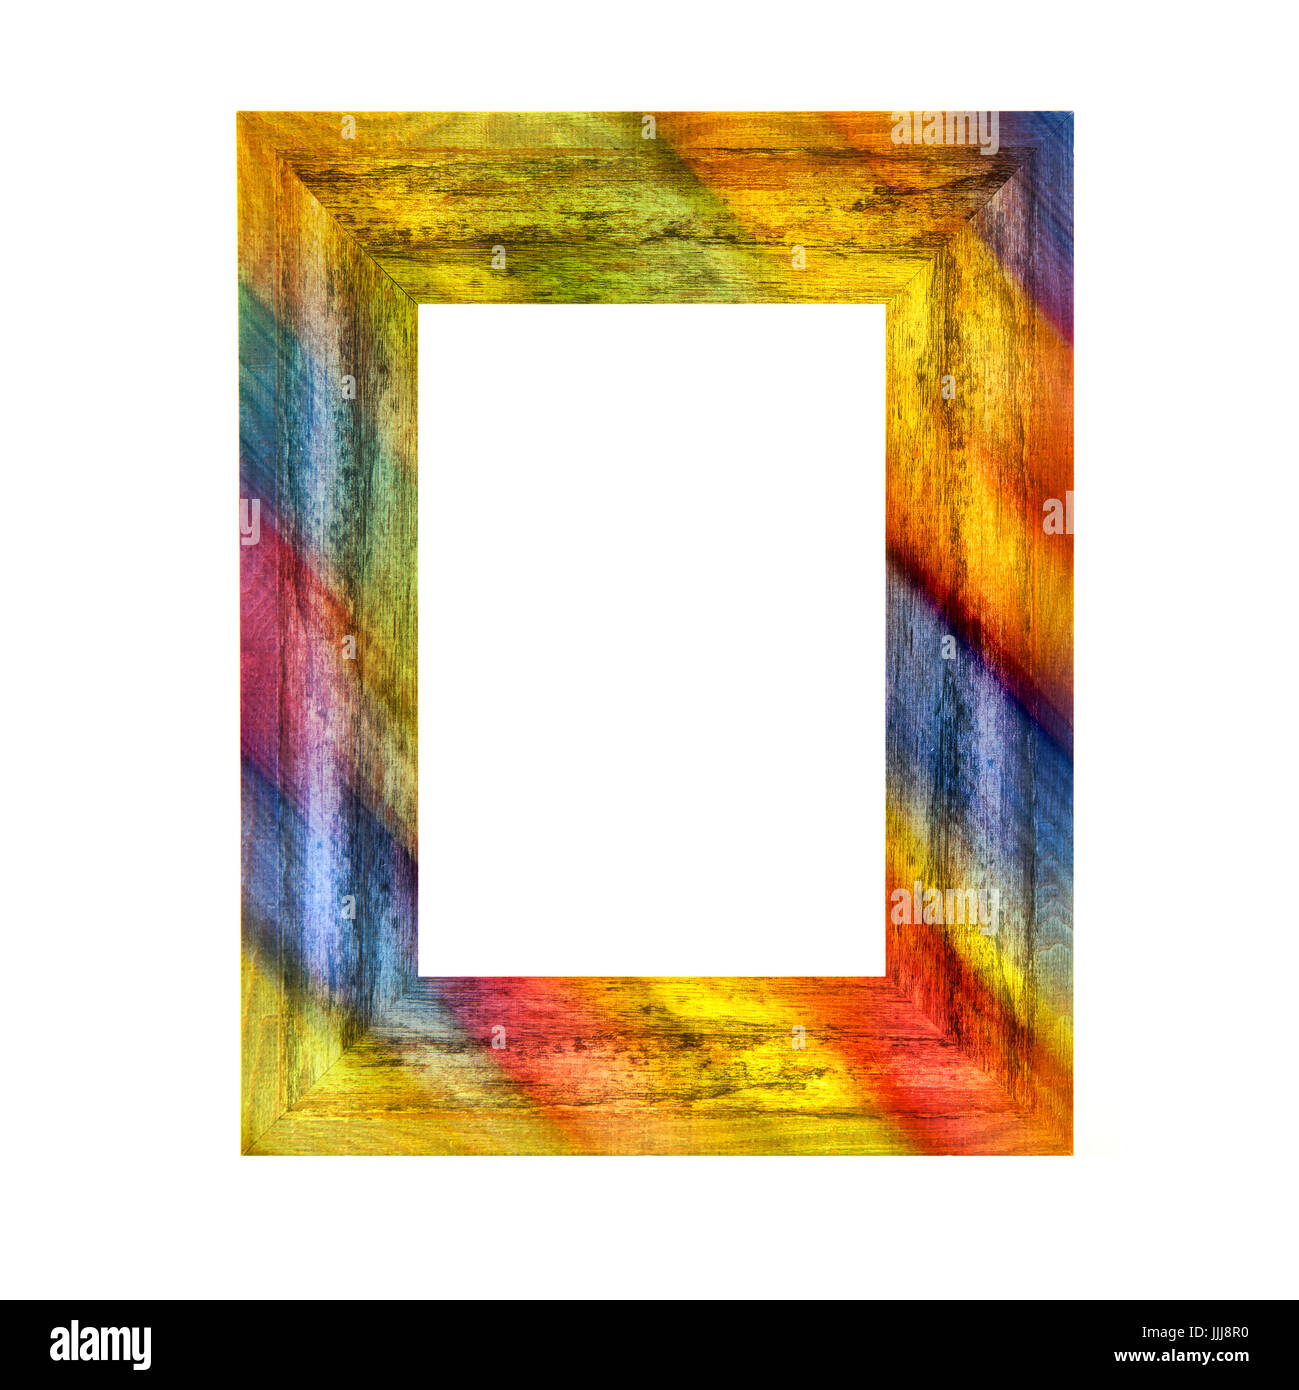 Colouful Wooden Frame on a white background Stock Photo